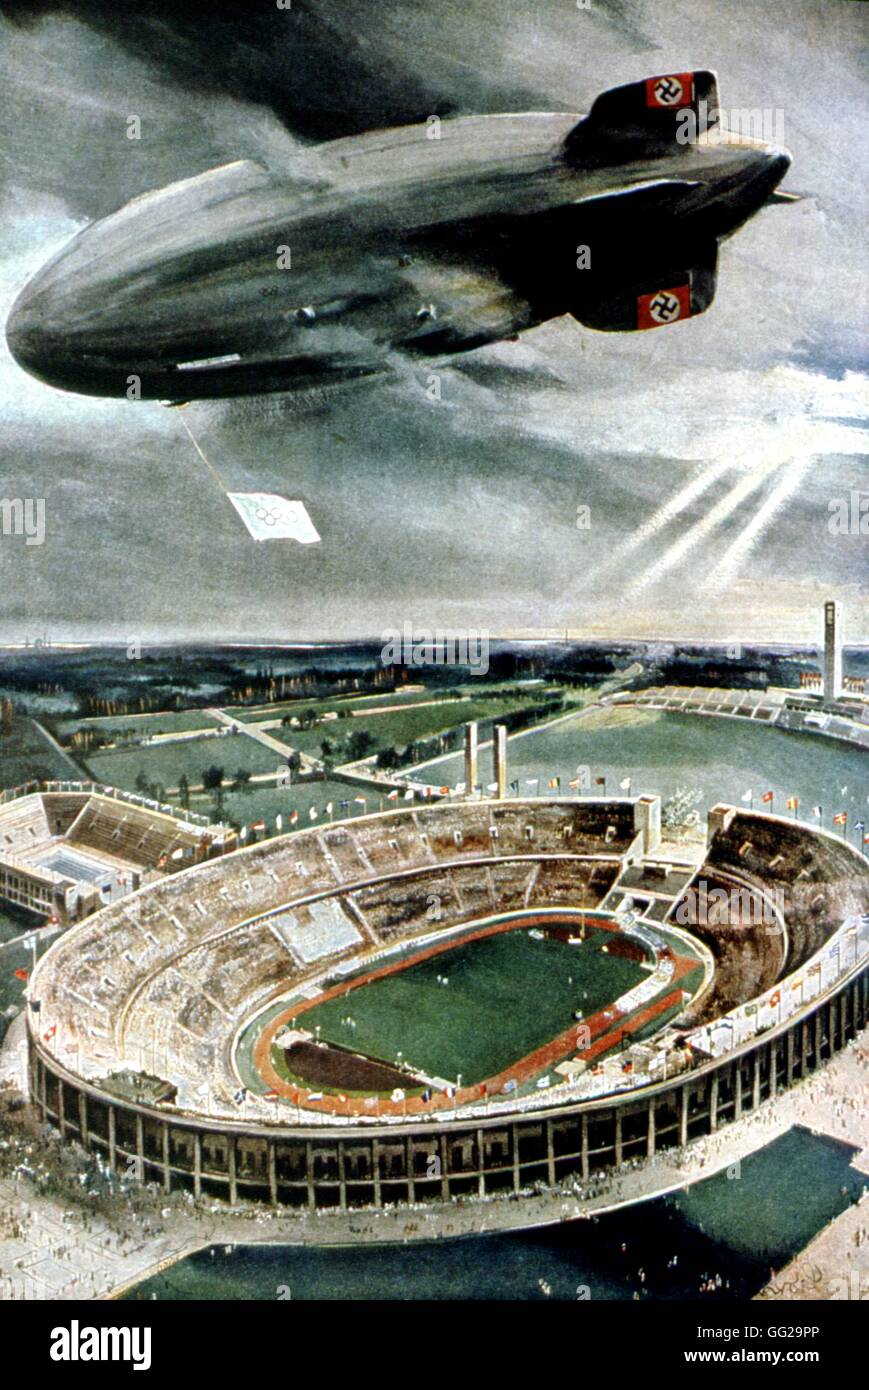 Poster: The 1936 Olympic Games opening ceremony The hinderburg balloon flying over the stadium 1936 Germany Washington, The Library of Congress Stock Photo